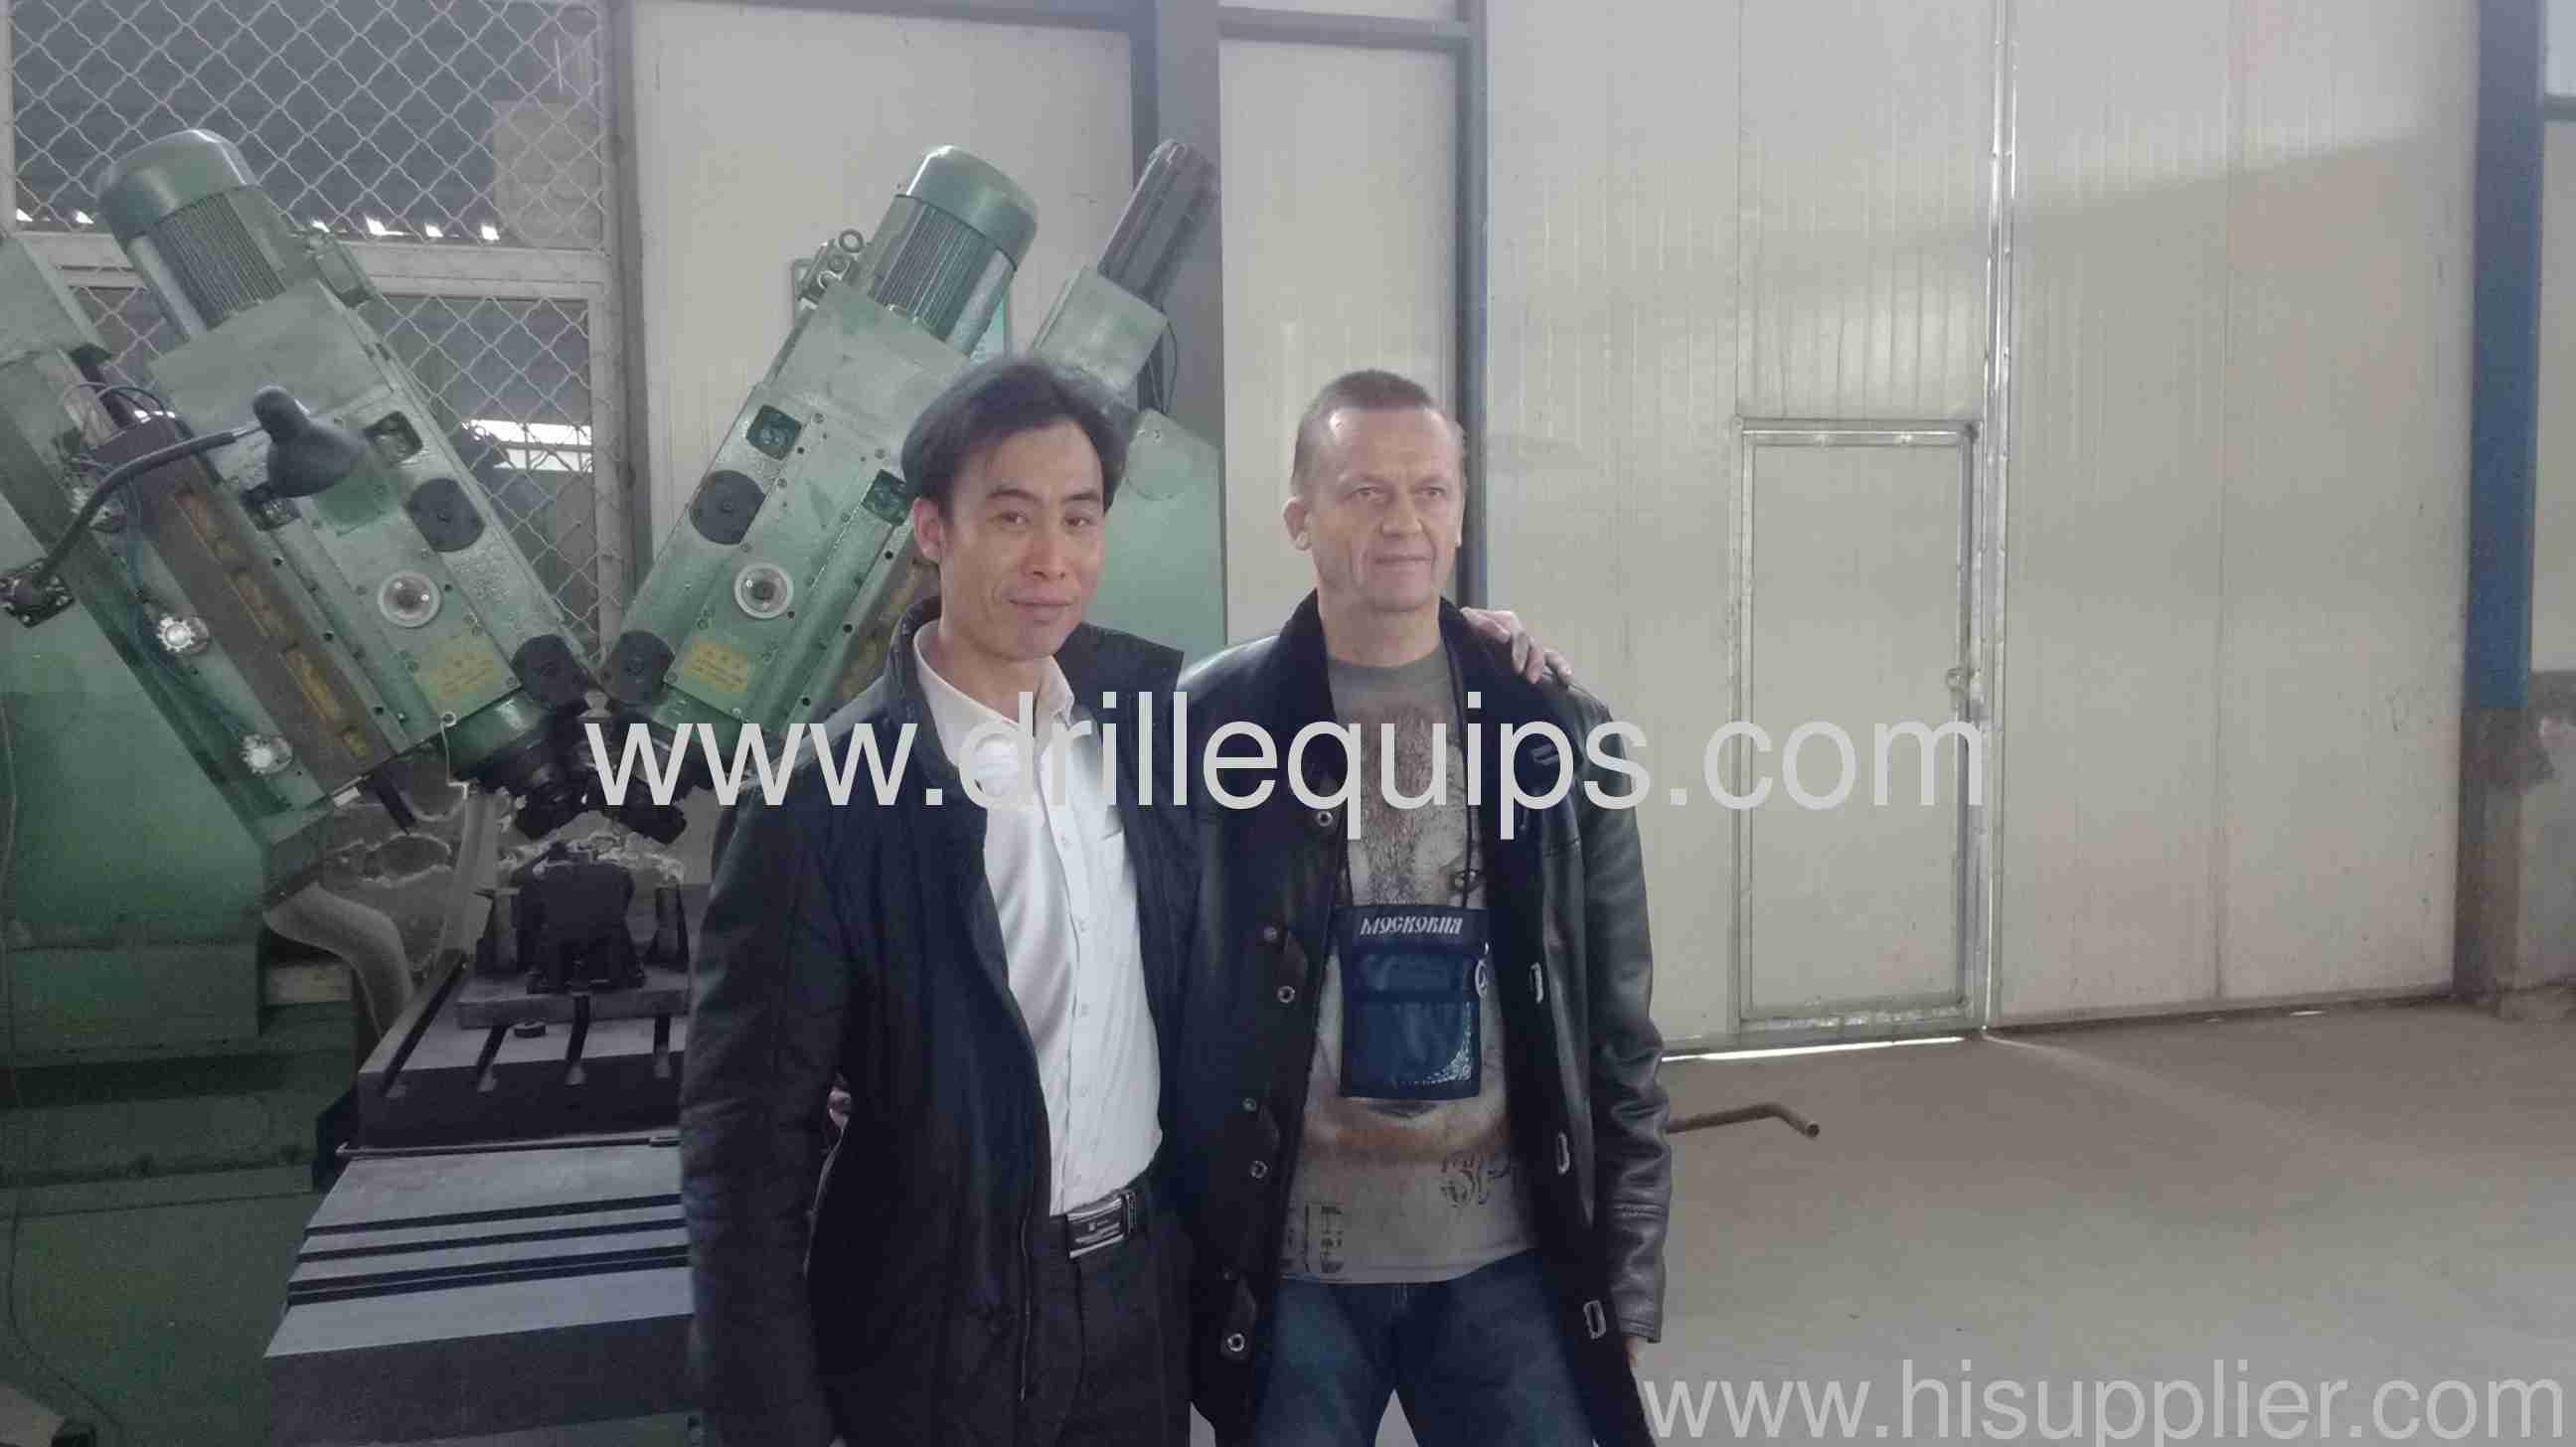 Warmly welcome customers from Russia to visit to my company